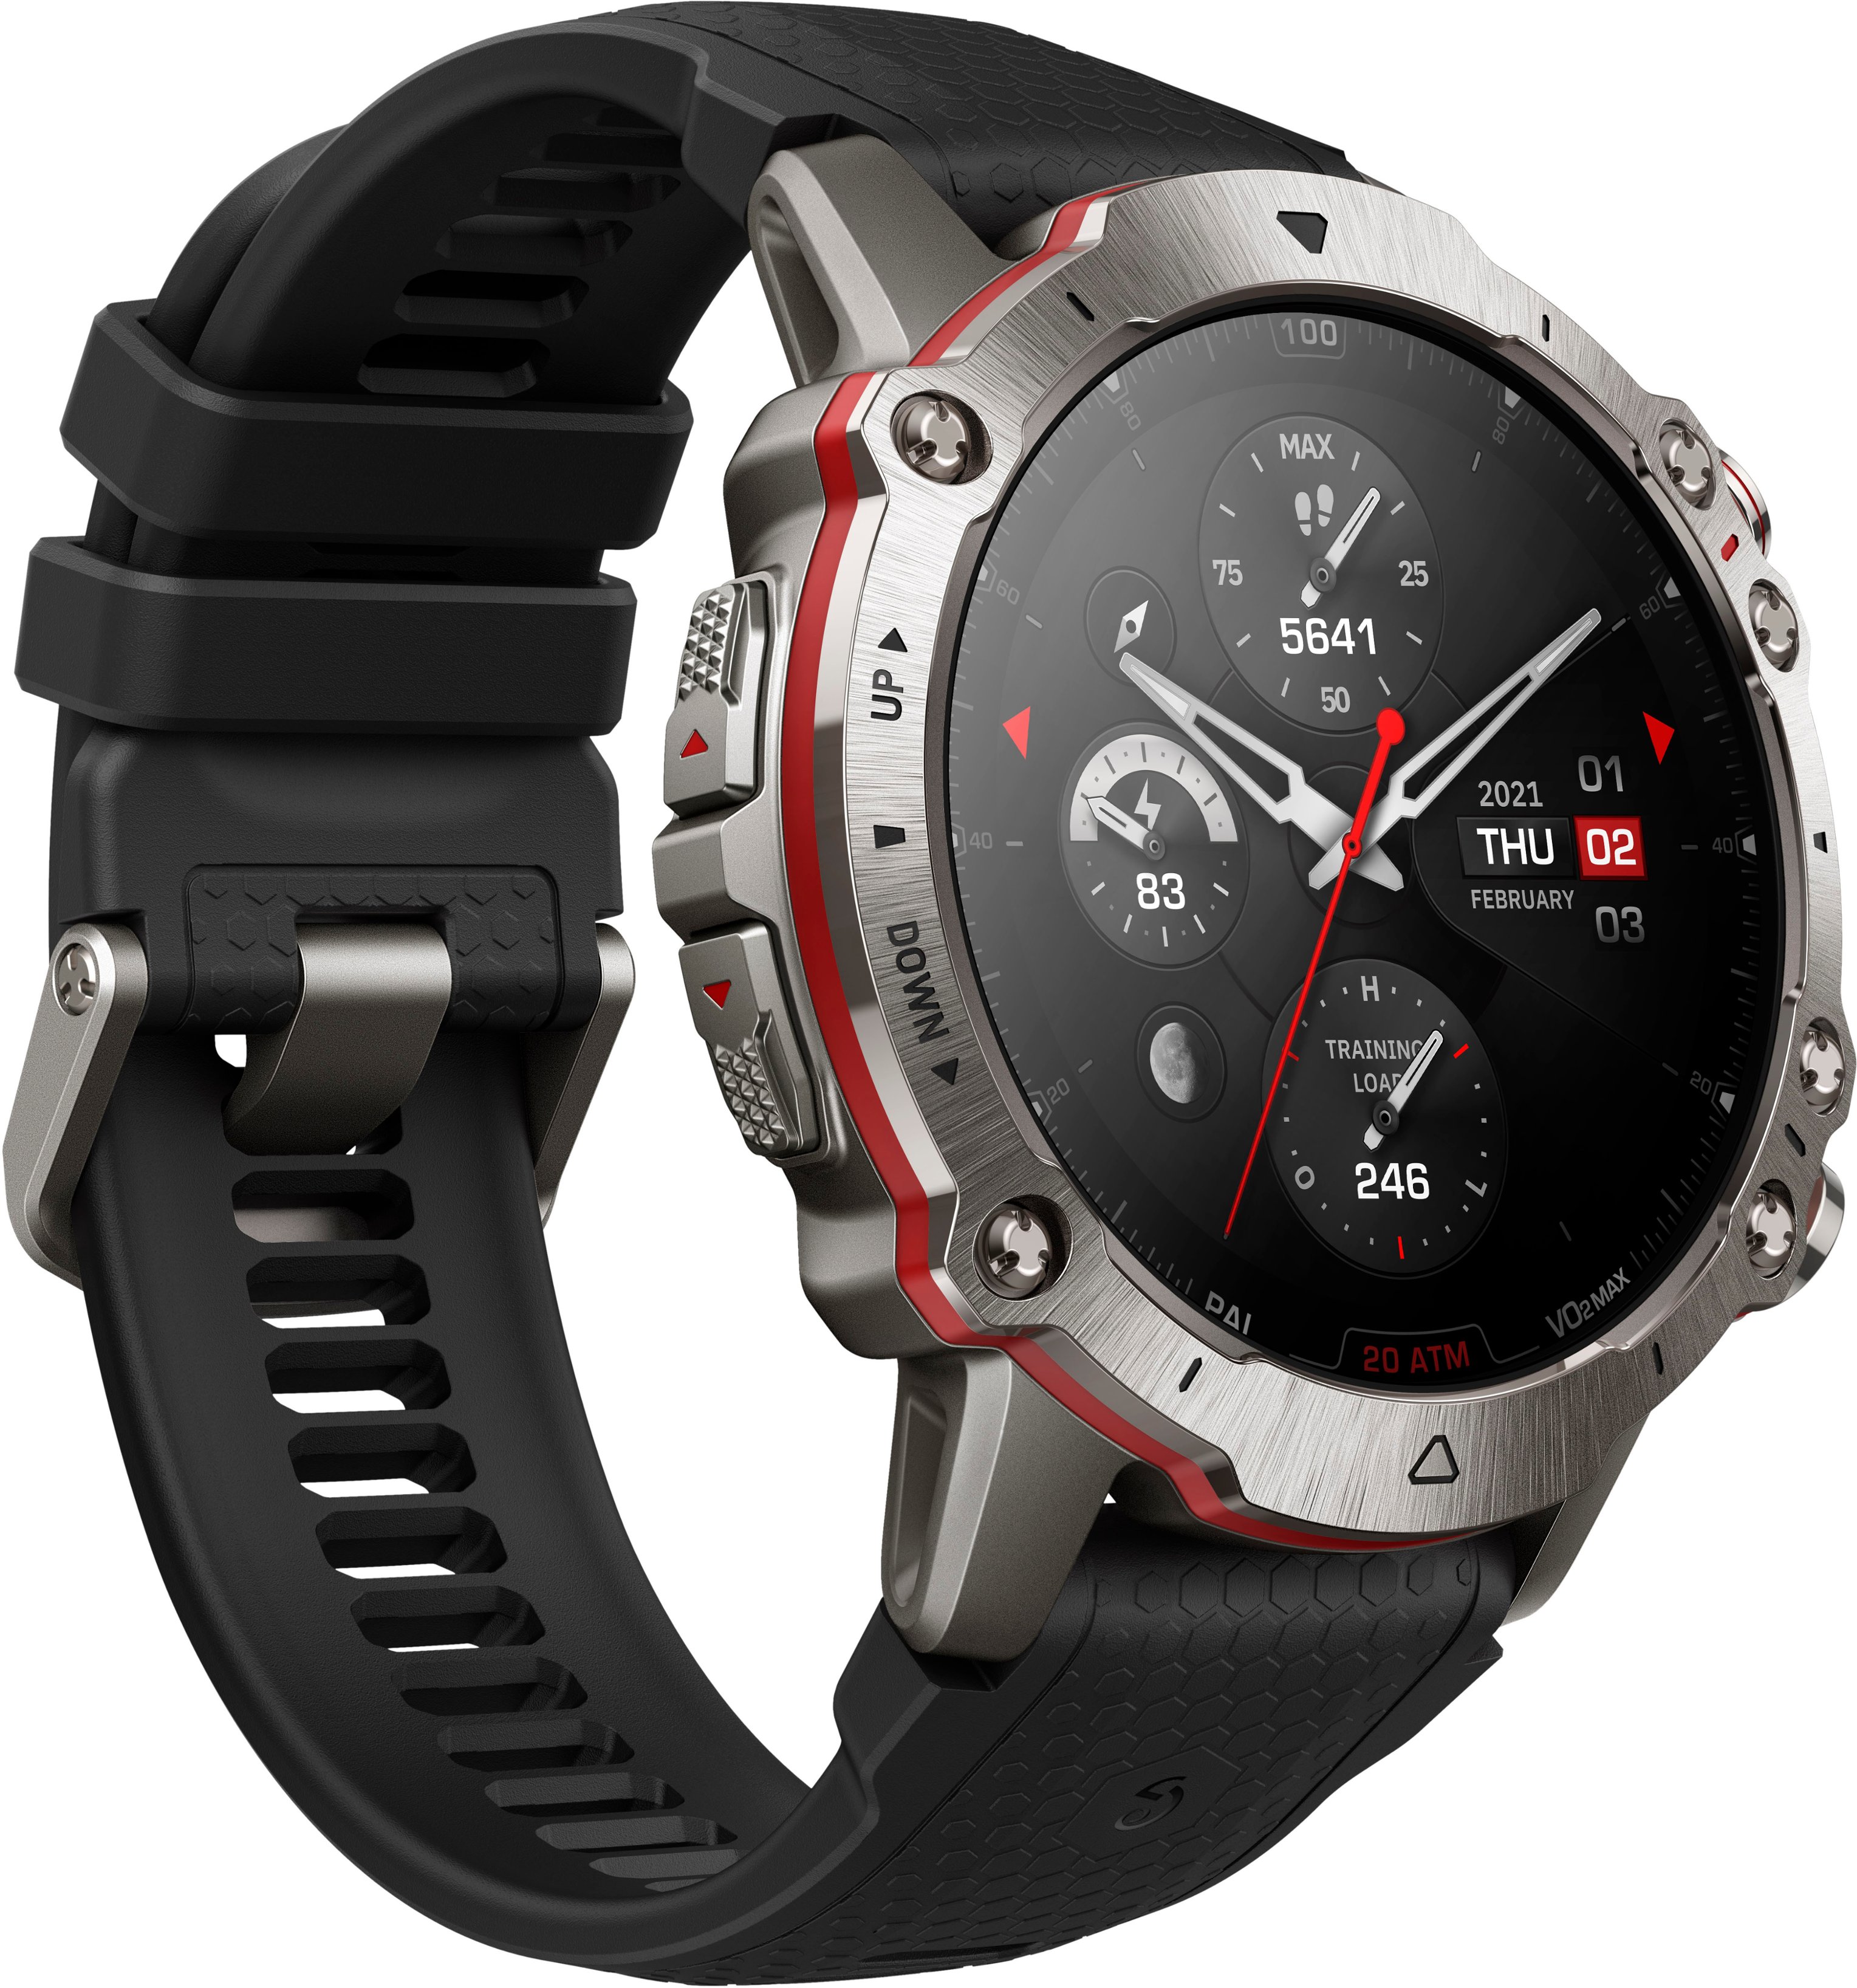 Amazfit Falcon Premium Military Smart Watch, Offline Map Support, Titanium  Body, 14 Days Battery Life, Dual-Band & 6 Satellite Positioning, Strength